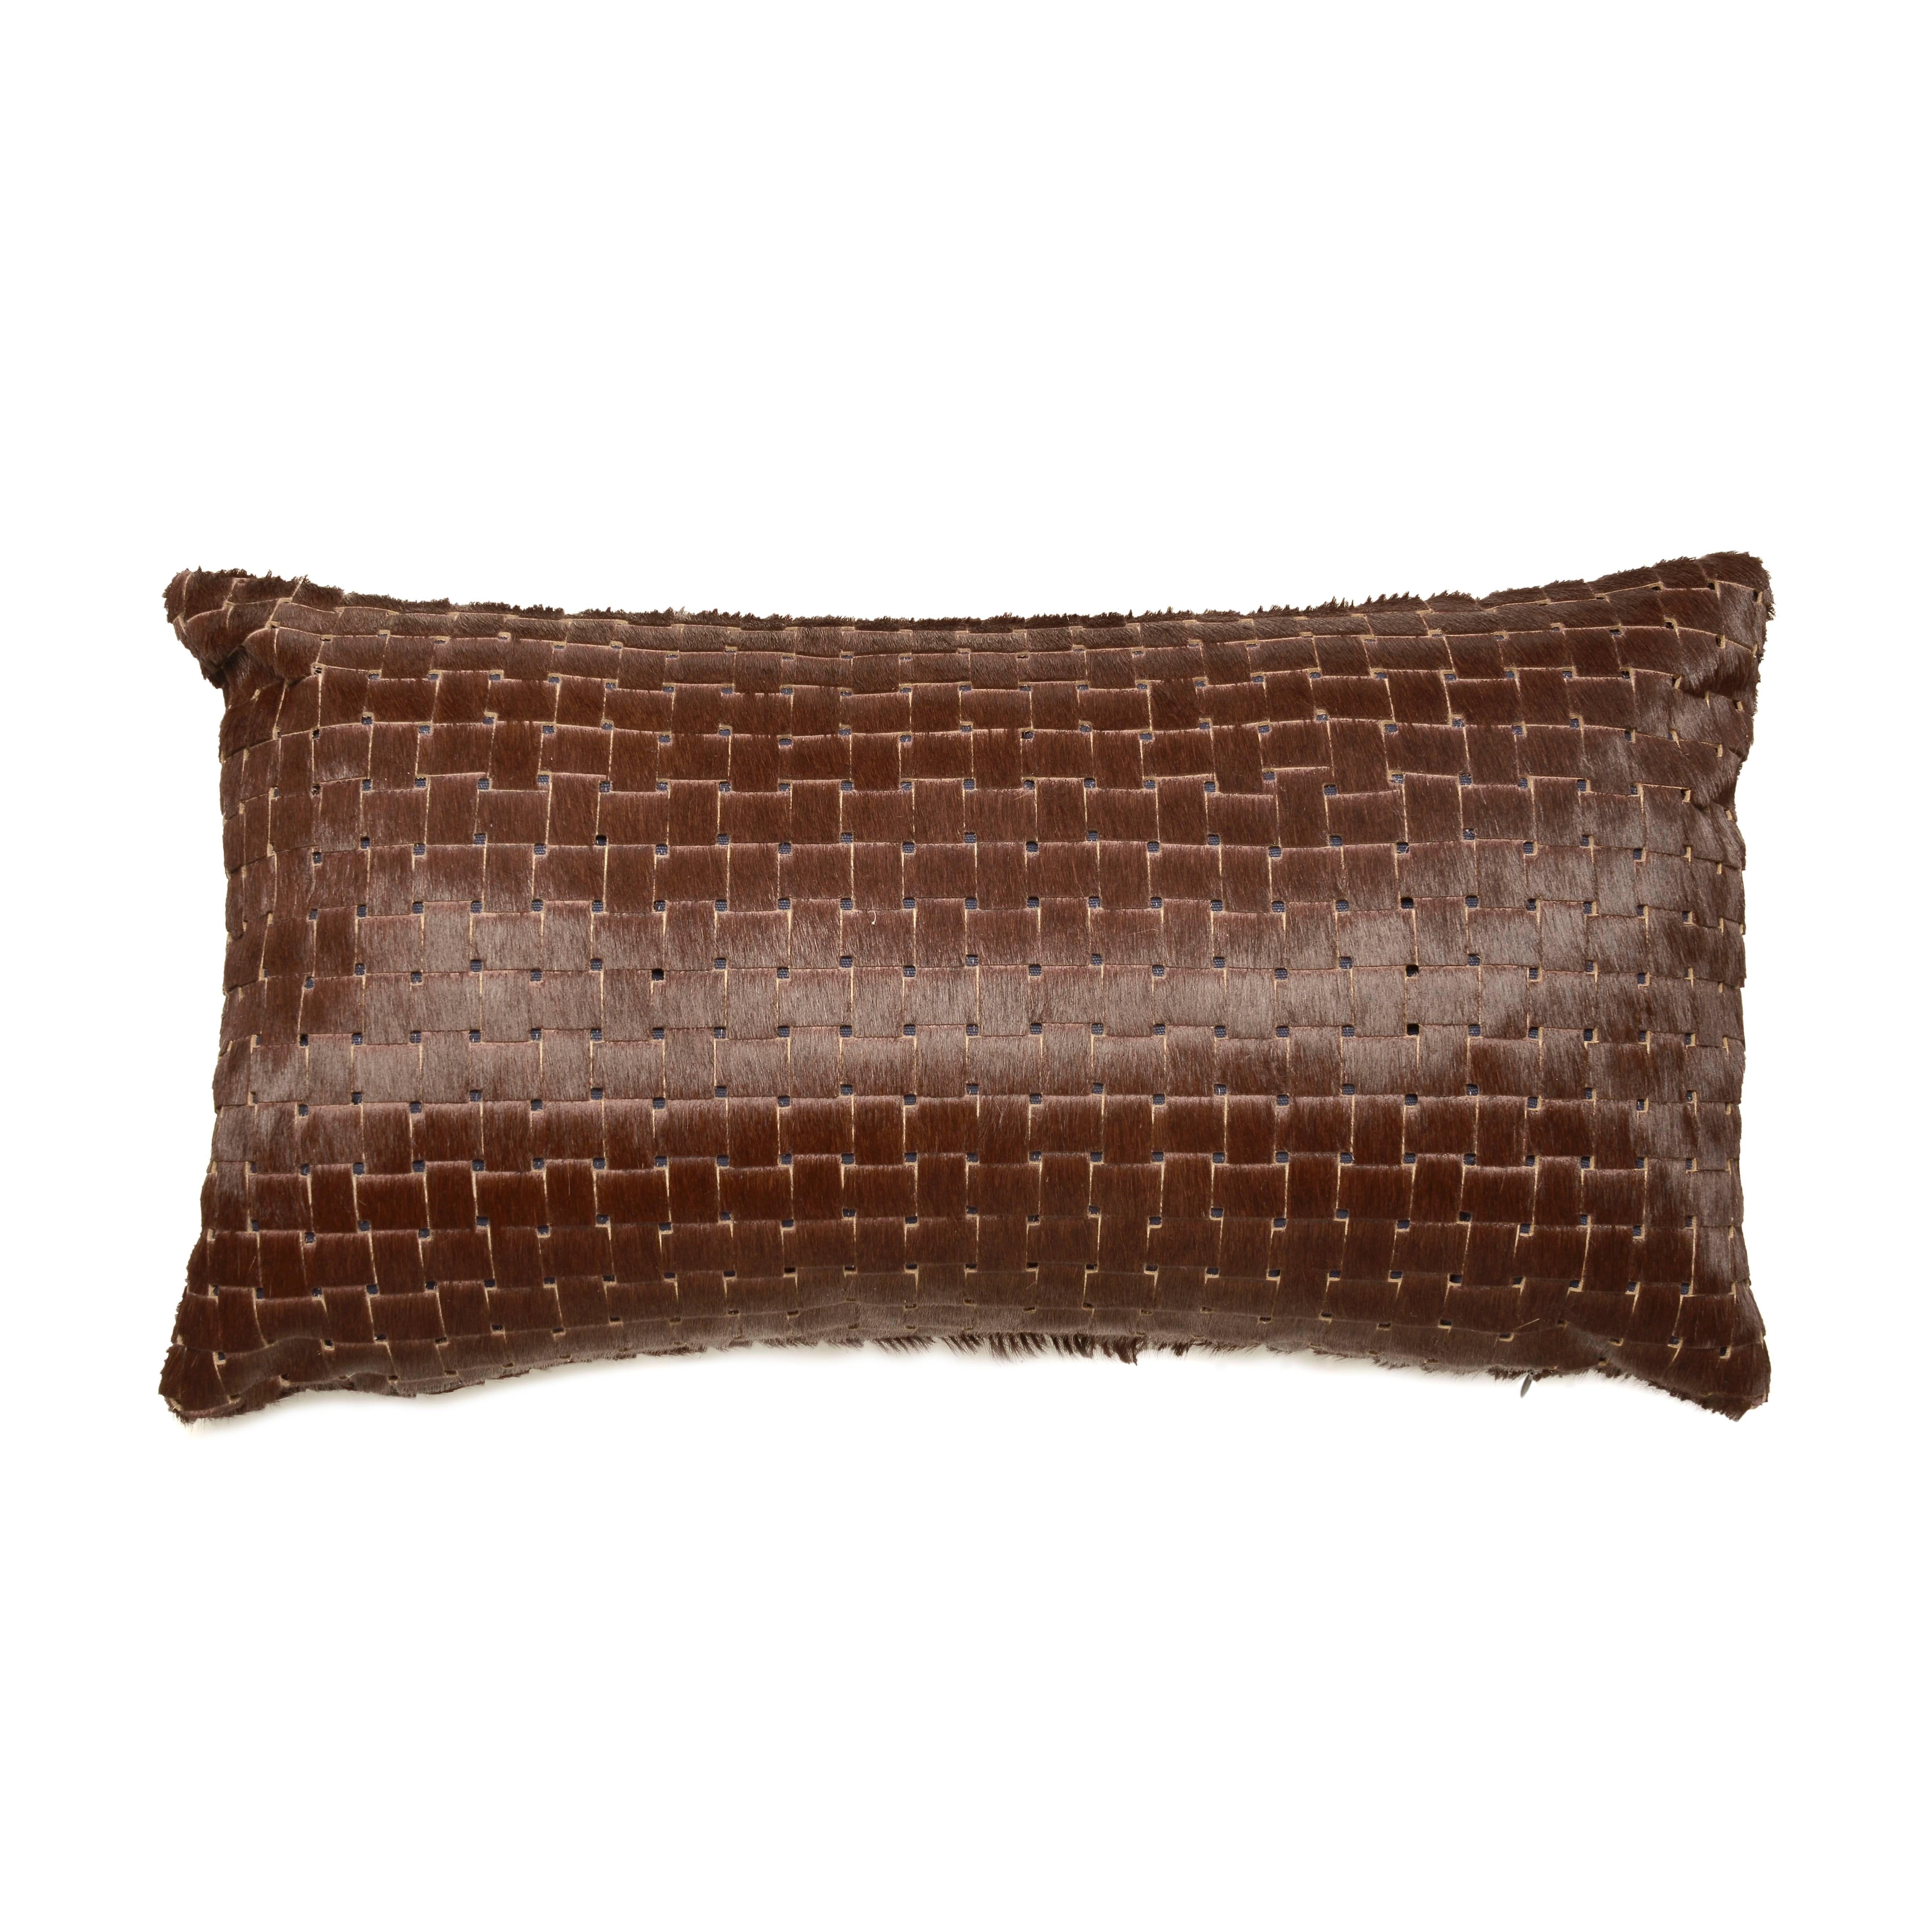 Chocolate brown laser cut cowhide hair lumbar pillows. 

Luxurious high sheen cowhide from Normandy, France.
Chocolate brown with navy lining visible through sure laser cuts.
Basket weave laser cut pattern.
12